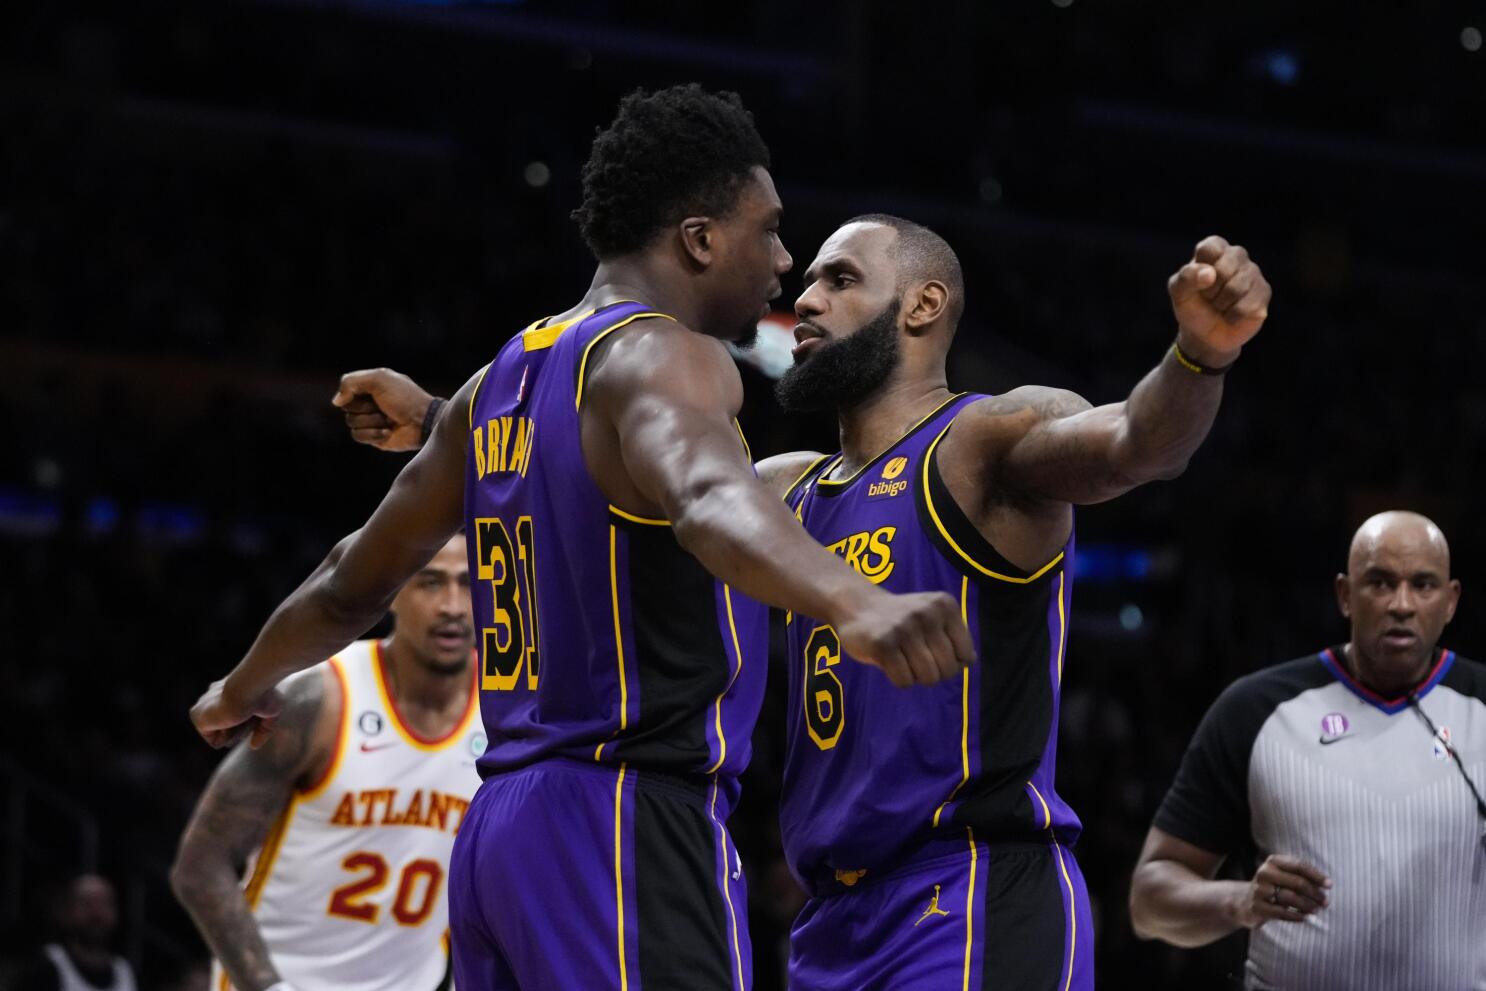 The Lakers' LeBron James is redefining NBA longevity as he reaches his 21st  season